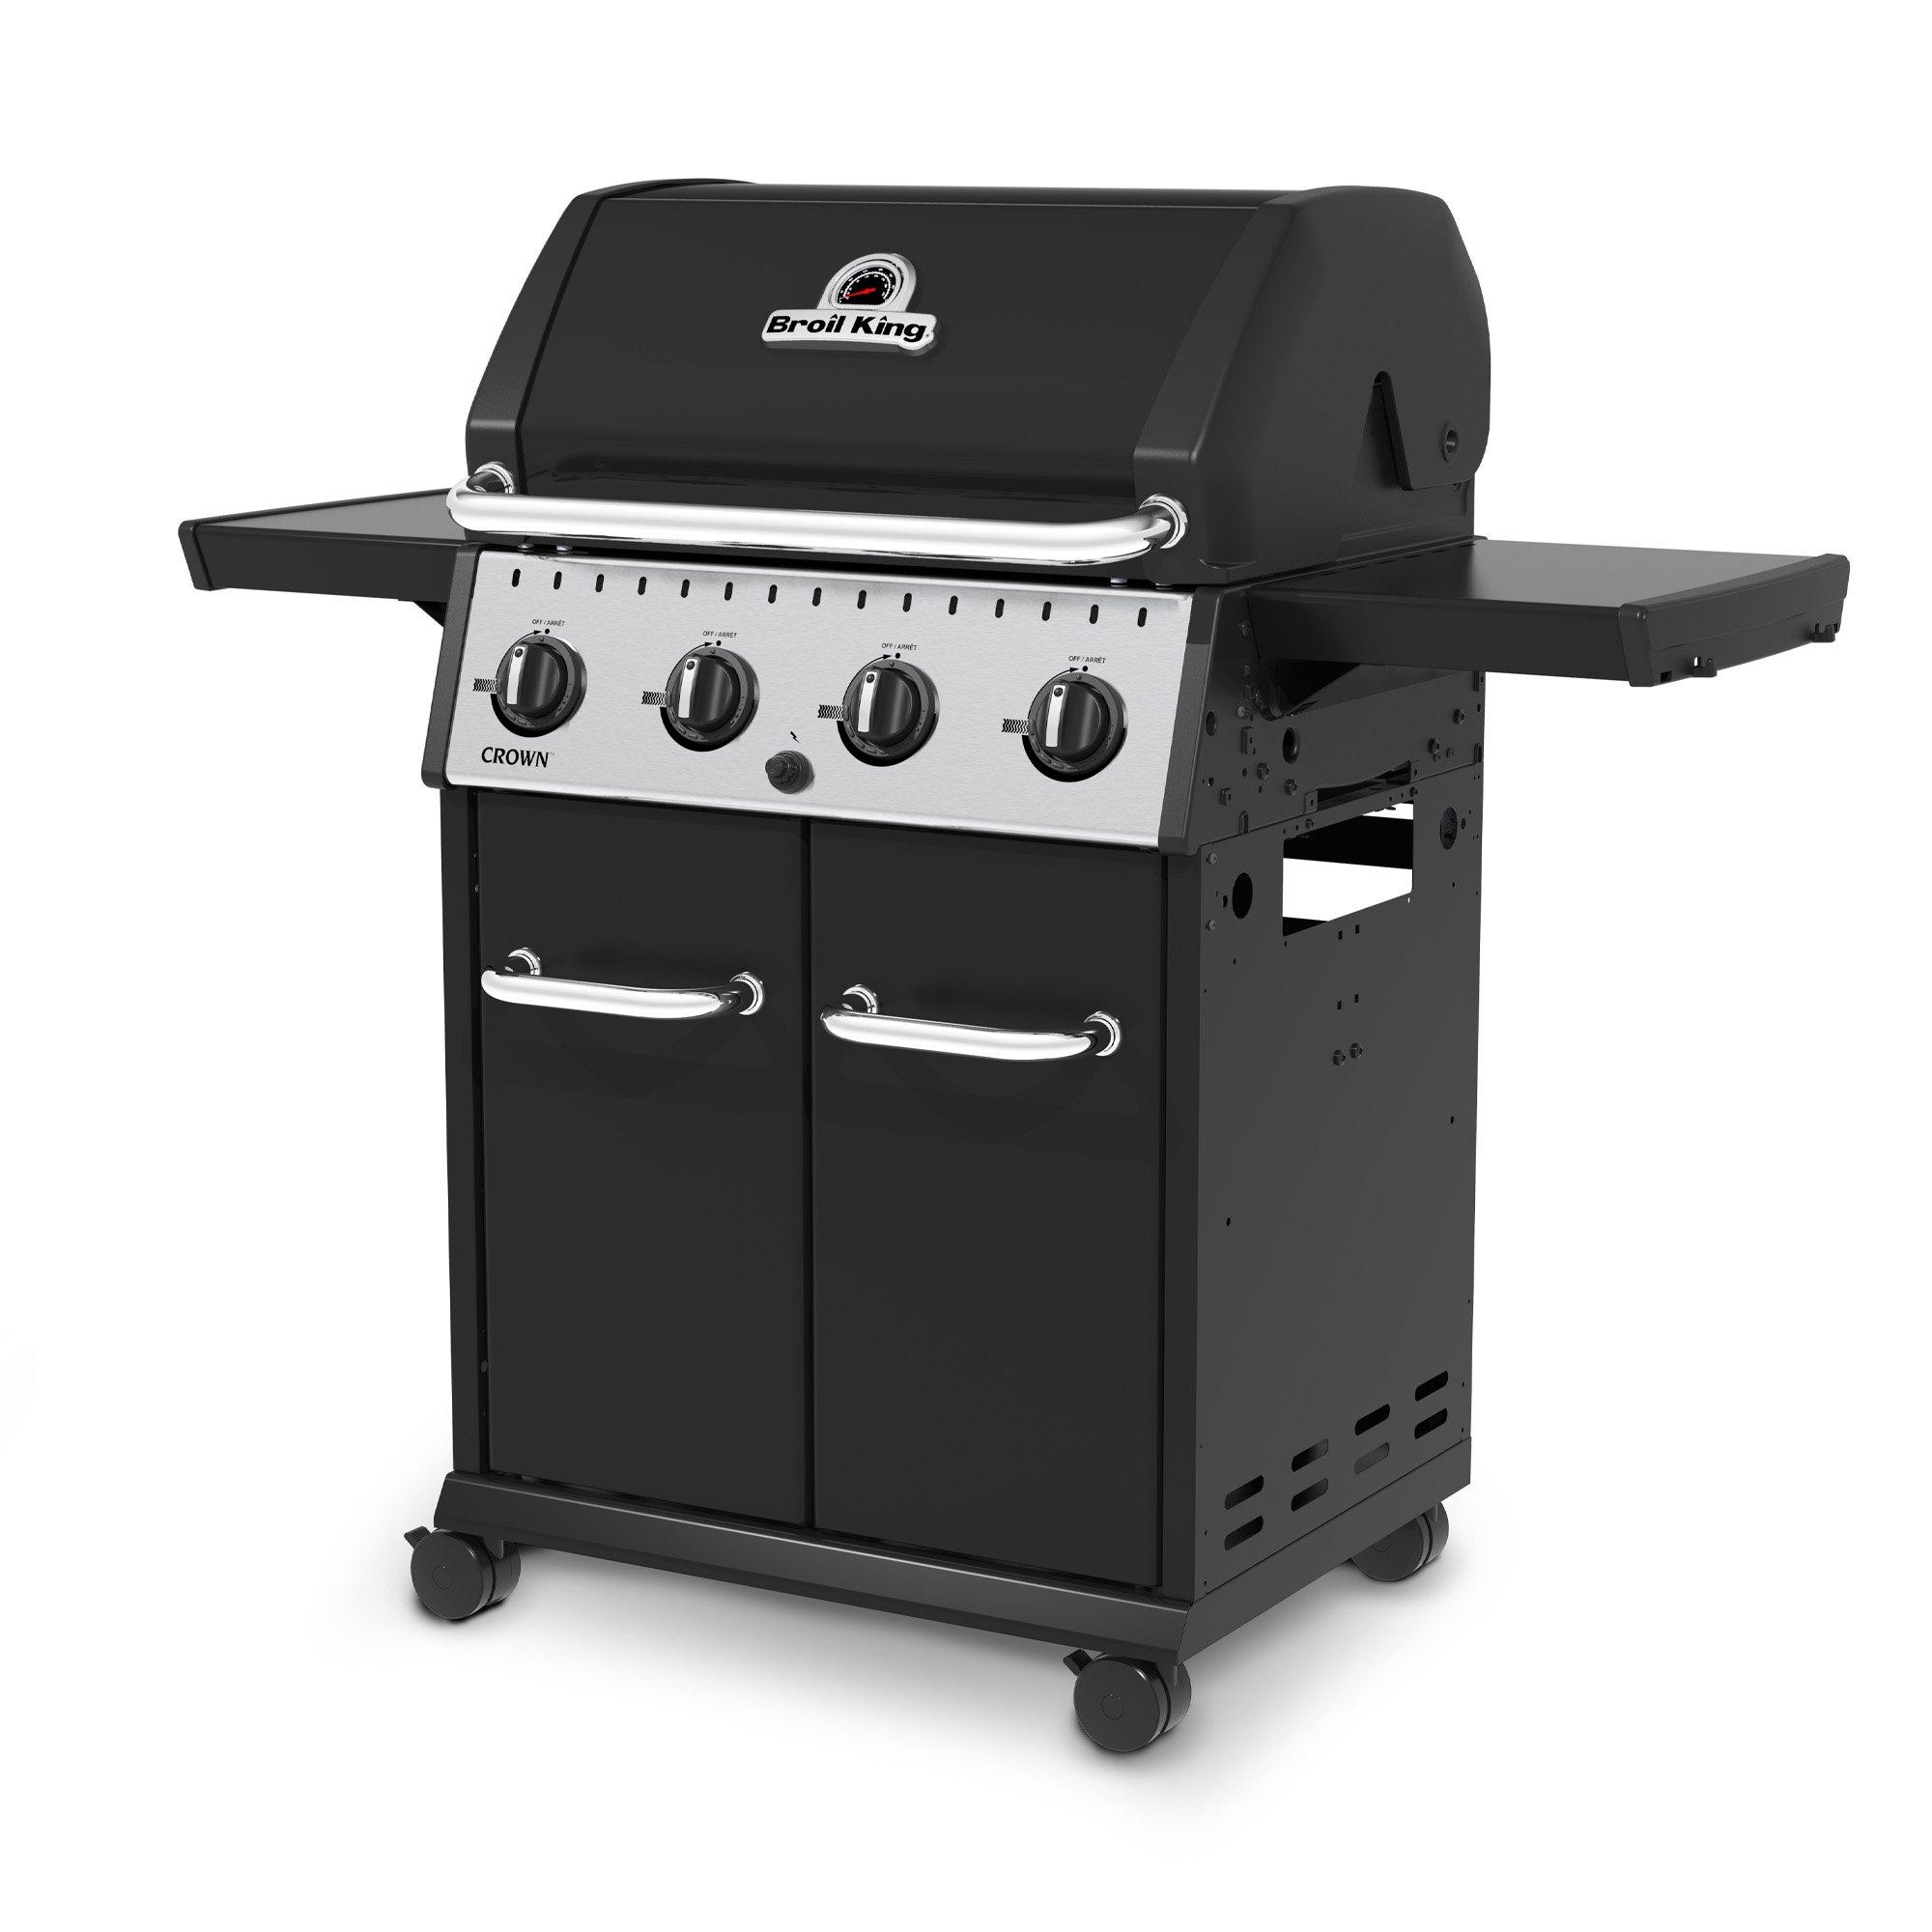 Image of Broil King Gasgrill Crown 420 - 145X61X116CM